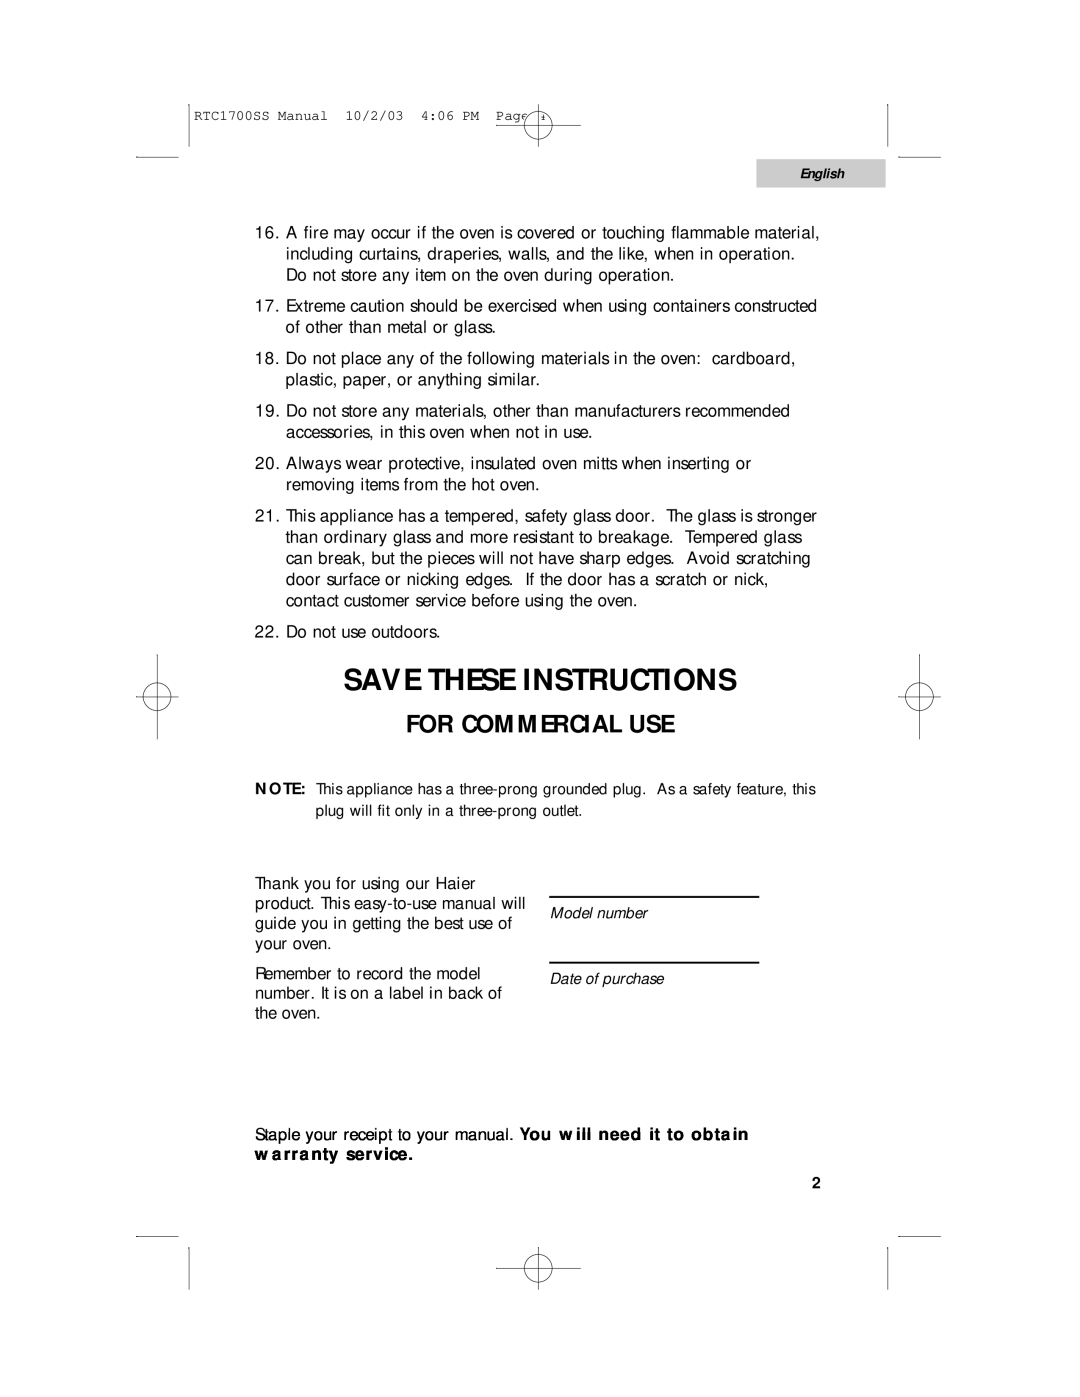 Haier RTC1700SS user manual Save These Instructions, warranty service, For Commercial Use, English 